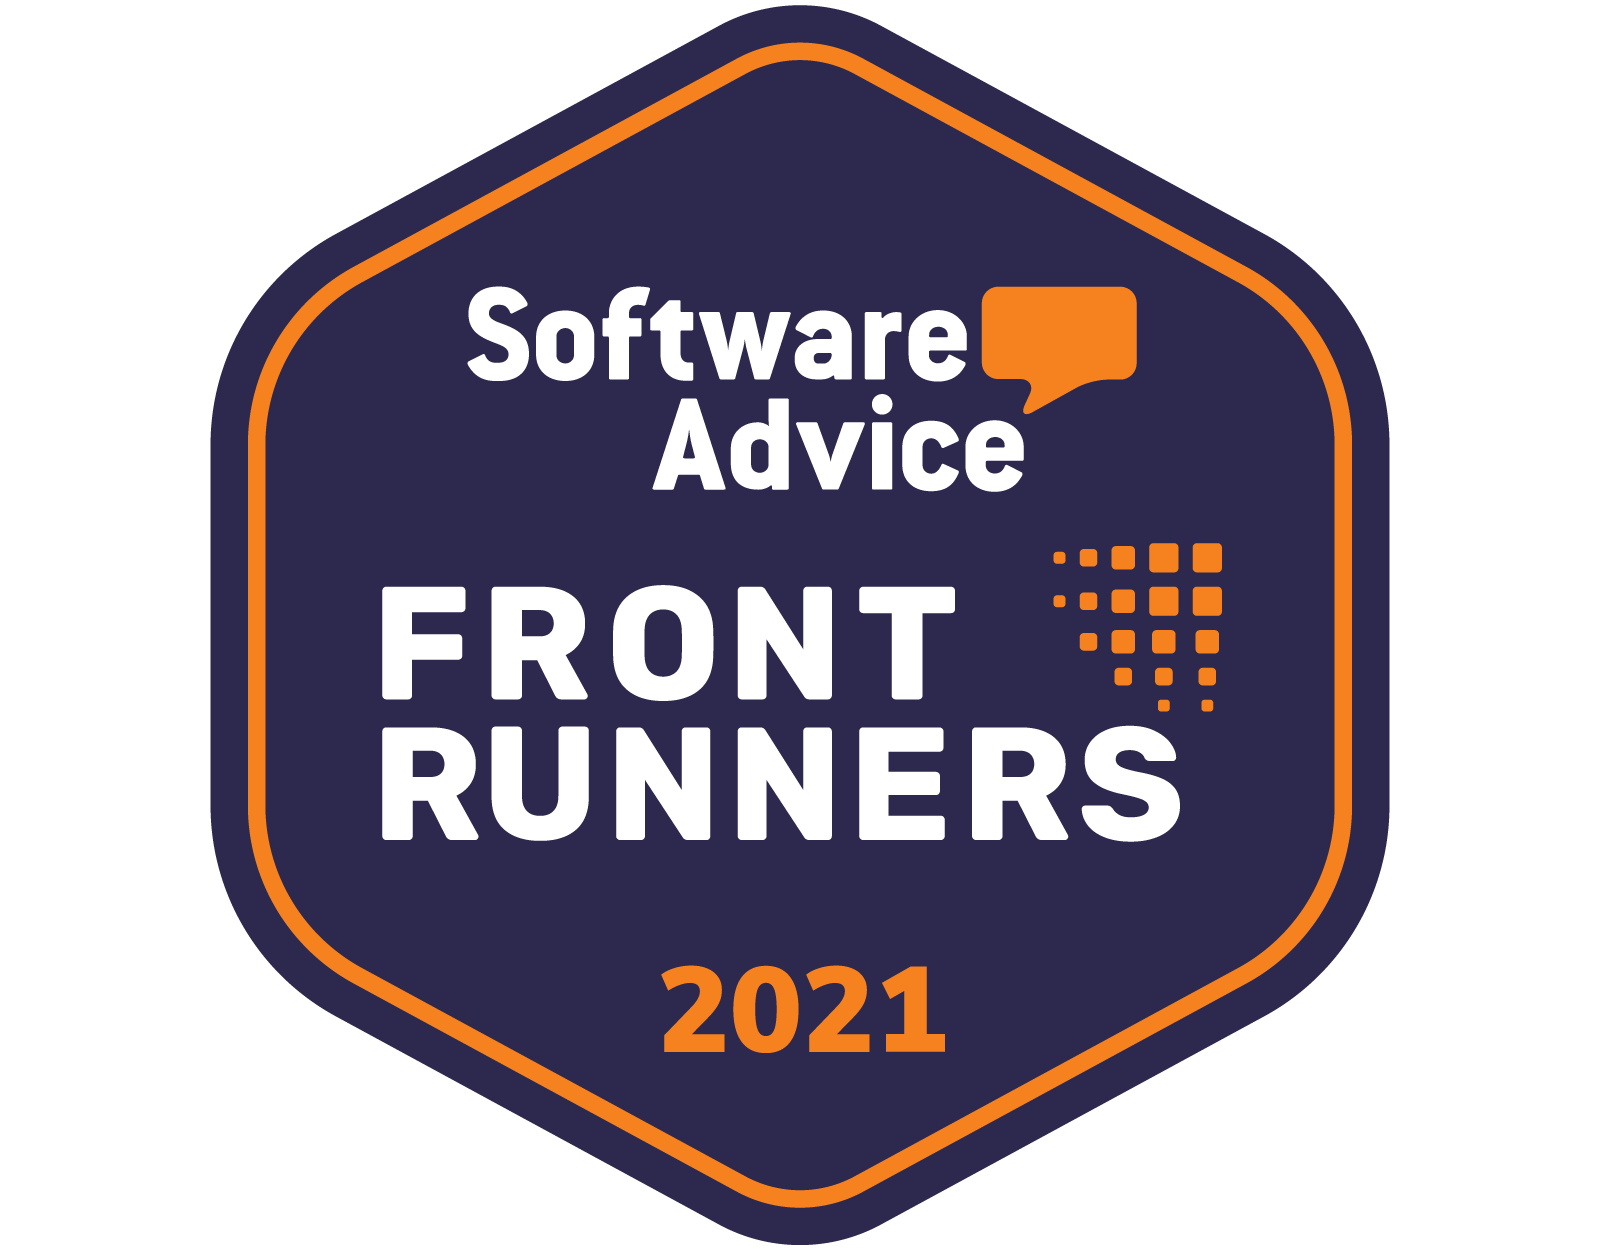 Software Advice Frontrunners for Complaint Management Sep-21